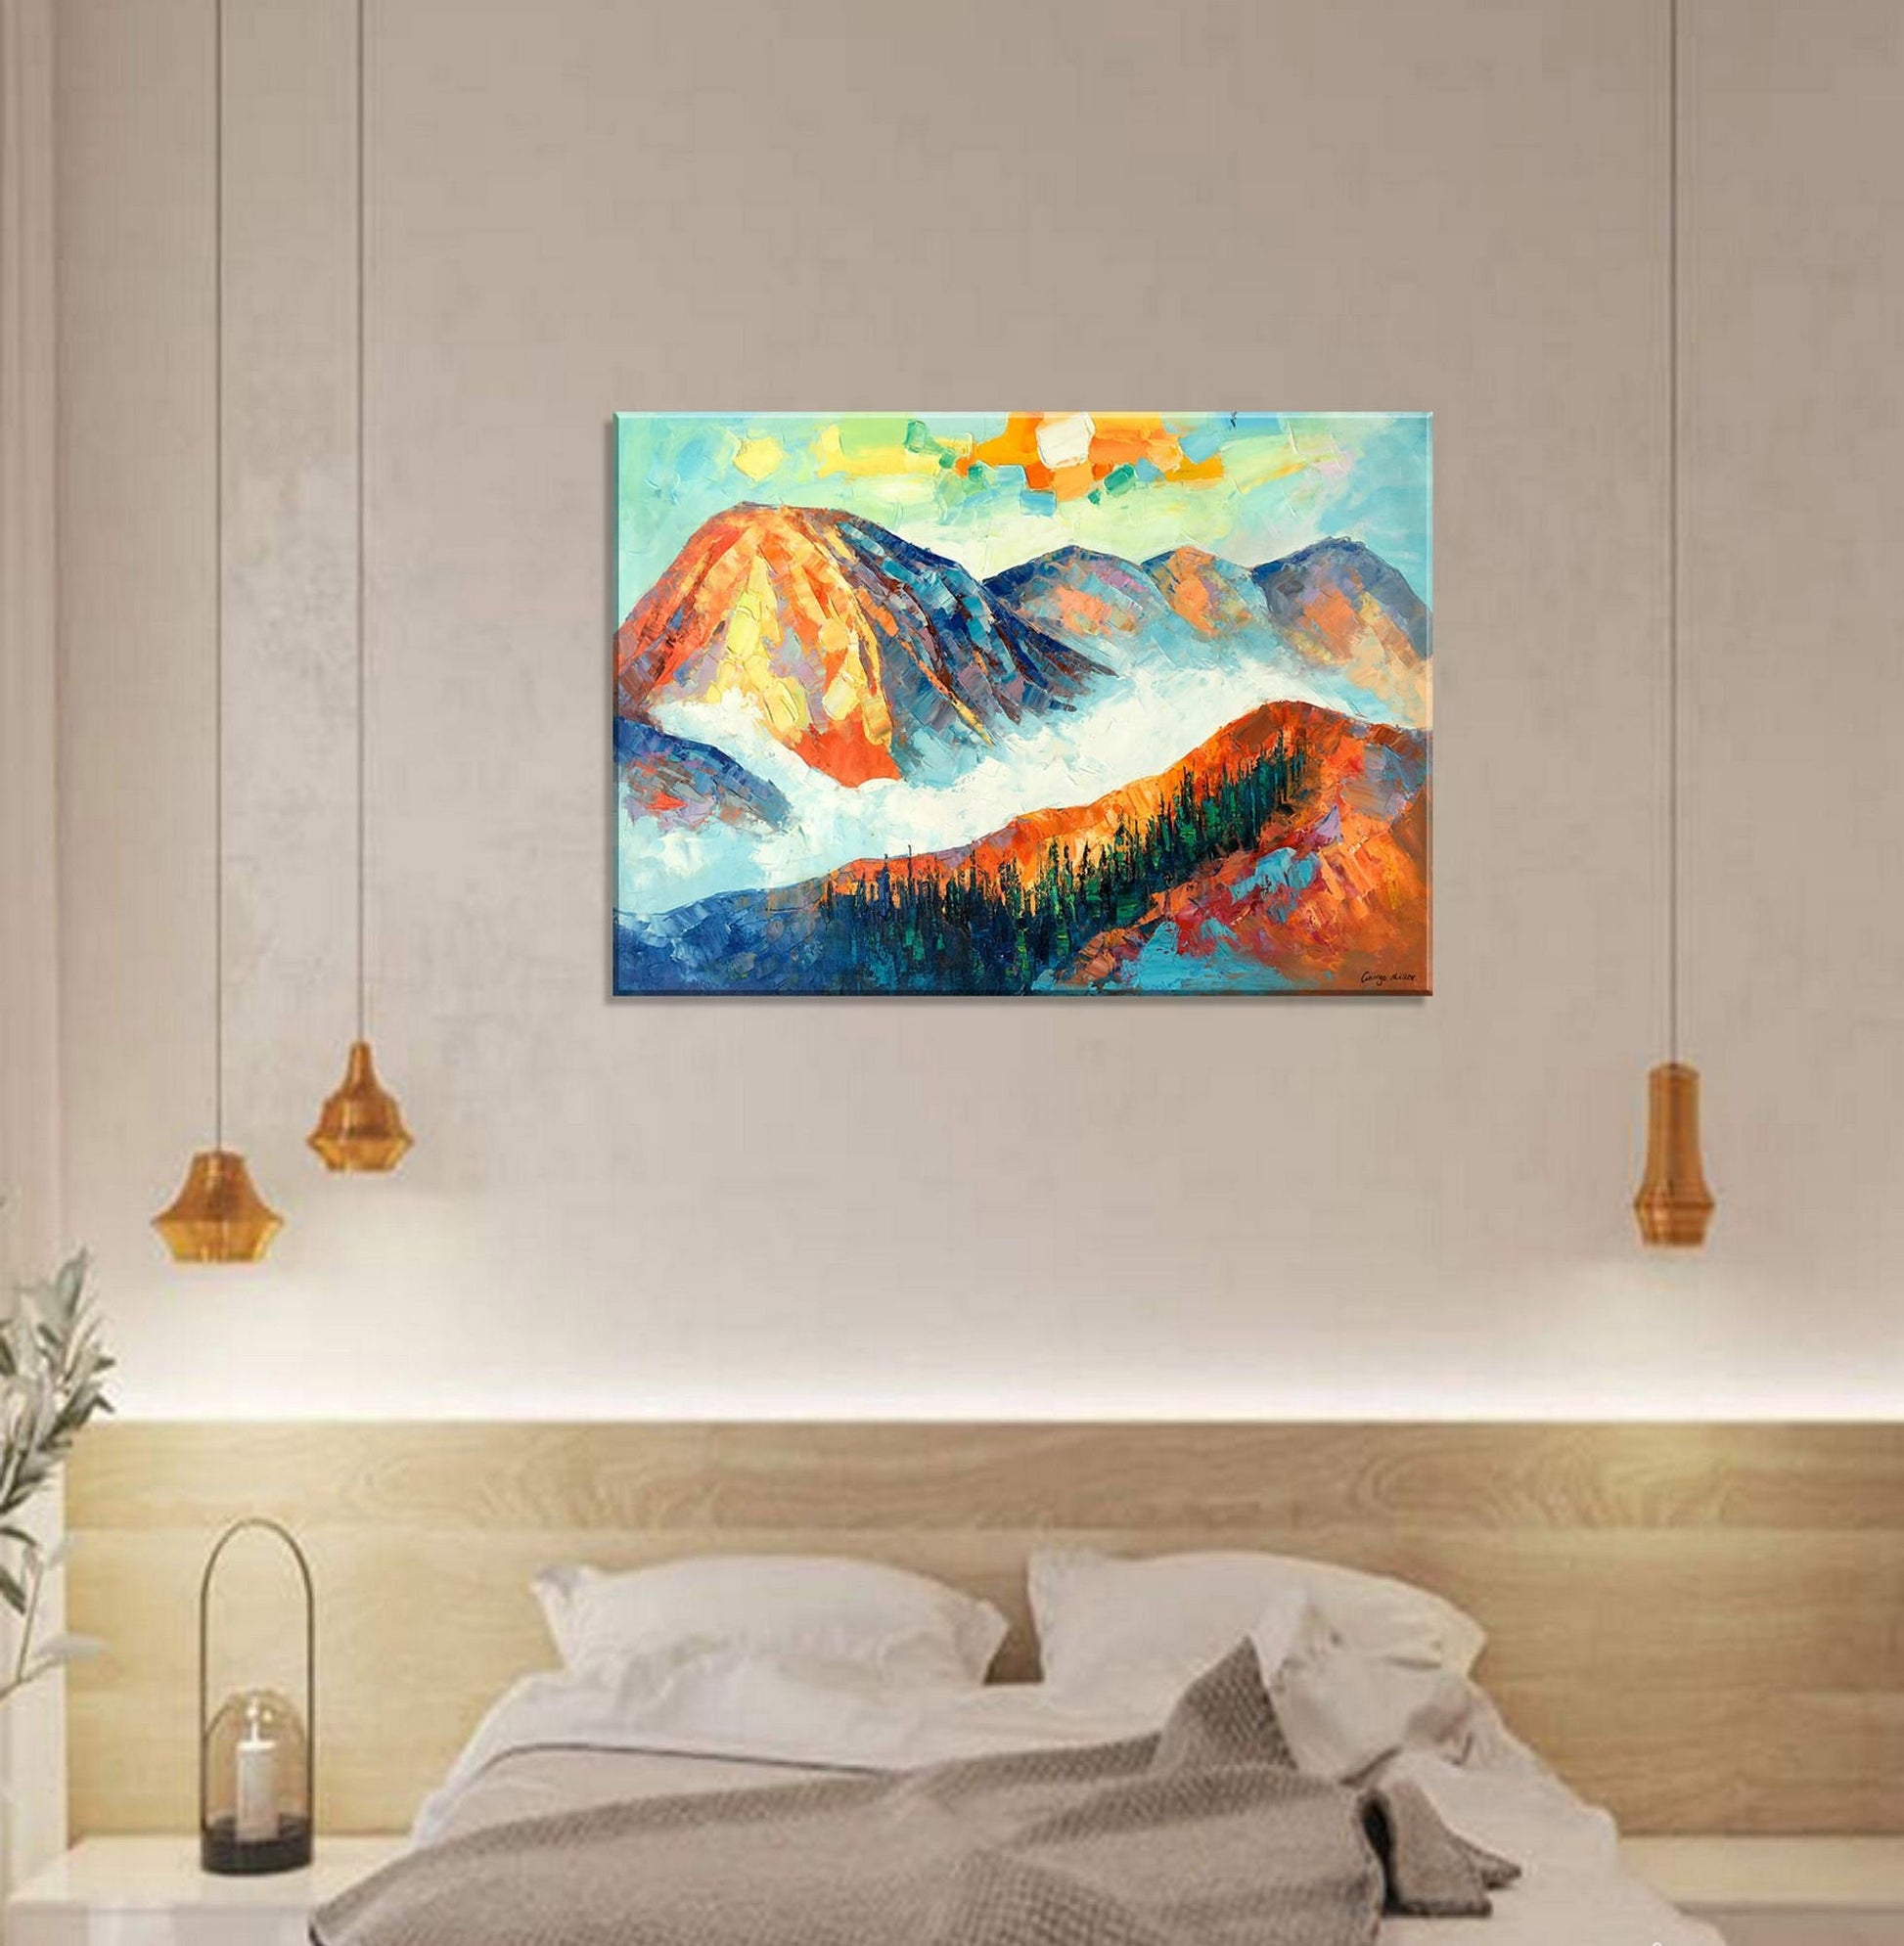 Colorful Oil Painting Abstract on Large Canvas - Contemporary Art for Your Modern Home Decor - Free Shipping - Perfect as Wall Art or a Gift